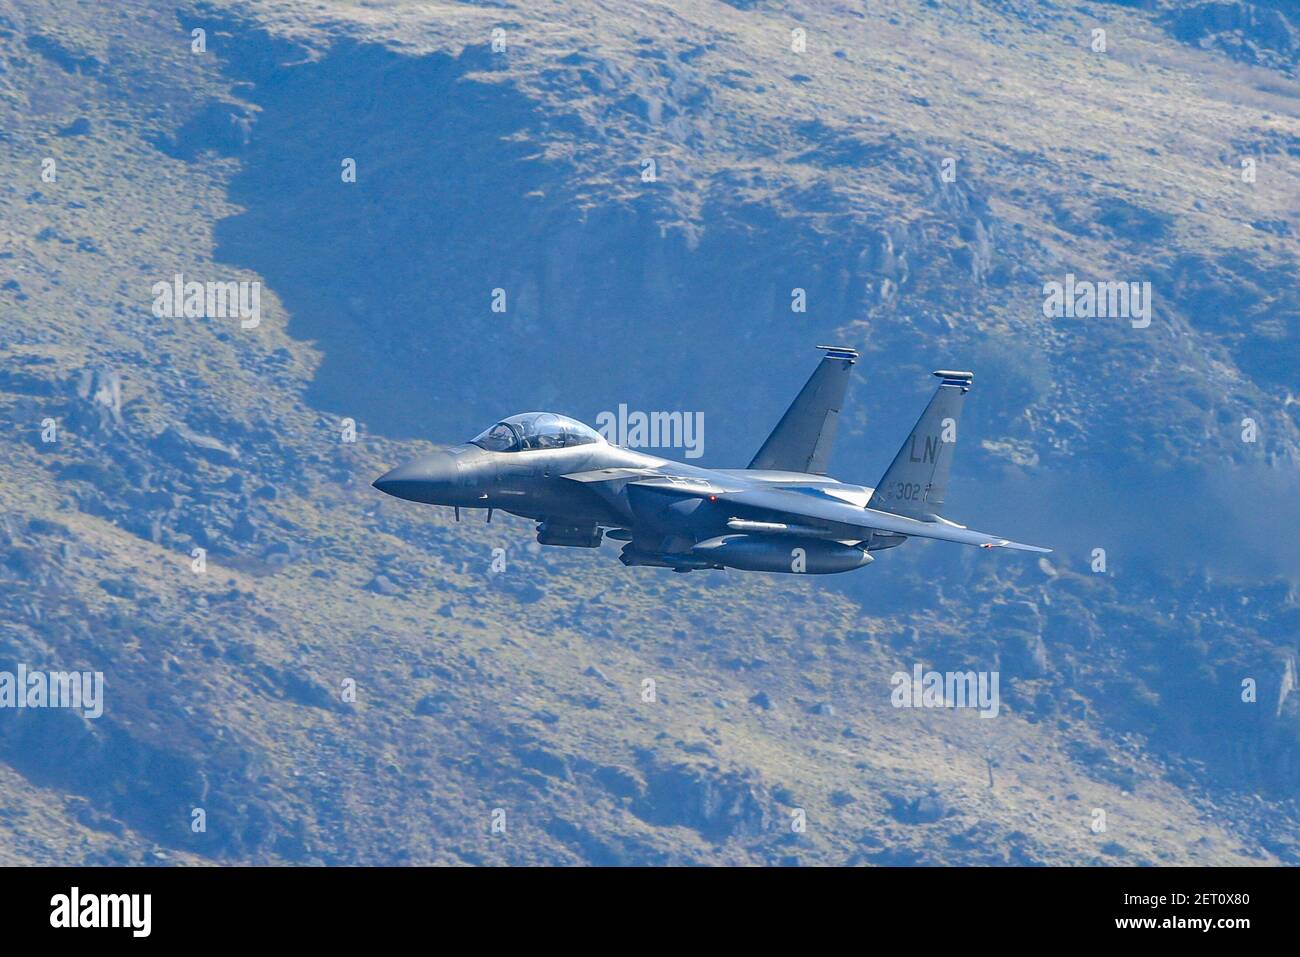 Thirlmere reservoir, near Keswick, The Lake District, Cumbria, UK. 1st March, 2021. A USAF McDonnell Douglas F-15 Eagle during low level training sorties over Thirlmere reservoir, near Keswick, The Lake District, Cumbria in Keswick, UK on 3/1/2021. (Photo by Mark Cosgrove/News Images/Sipa USA) Credit: Sipa USA/Alamy Live News Credit: Sipa USA/Alamy Live News Stock Photo